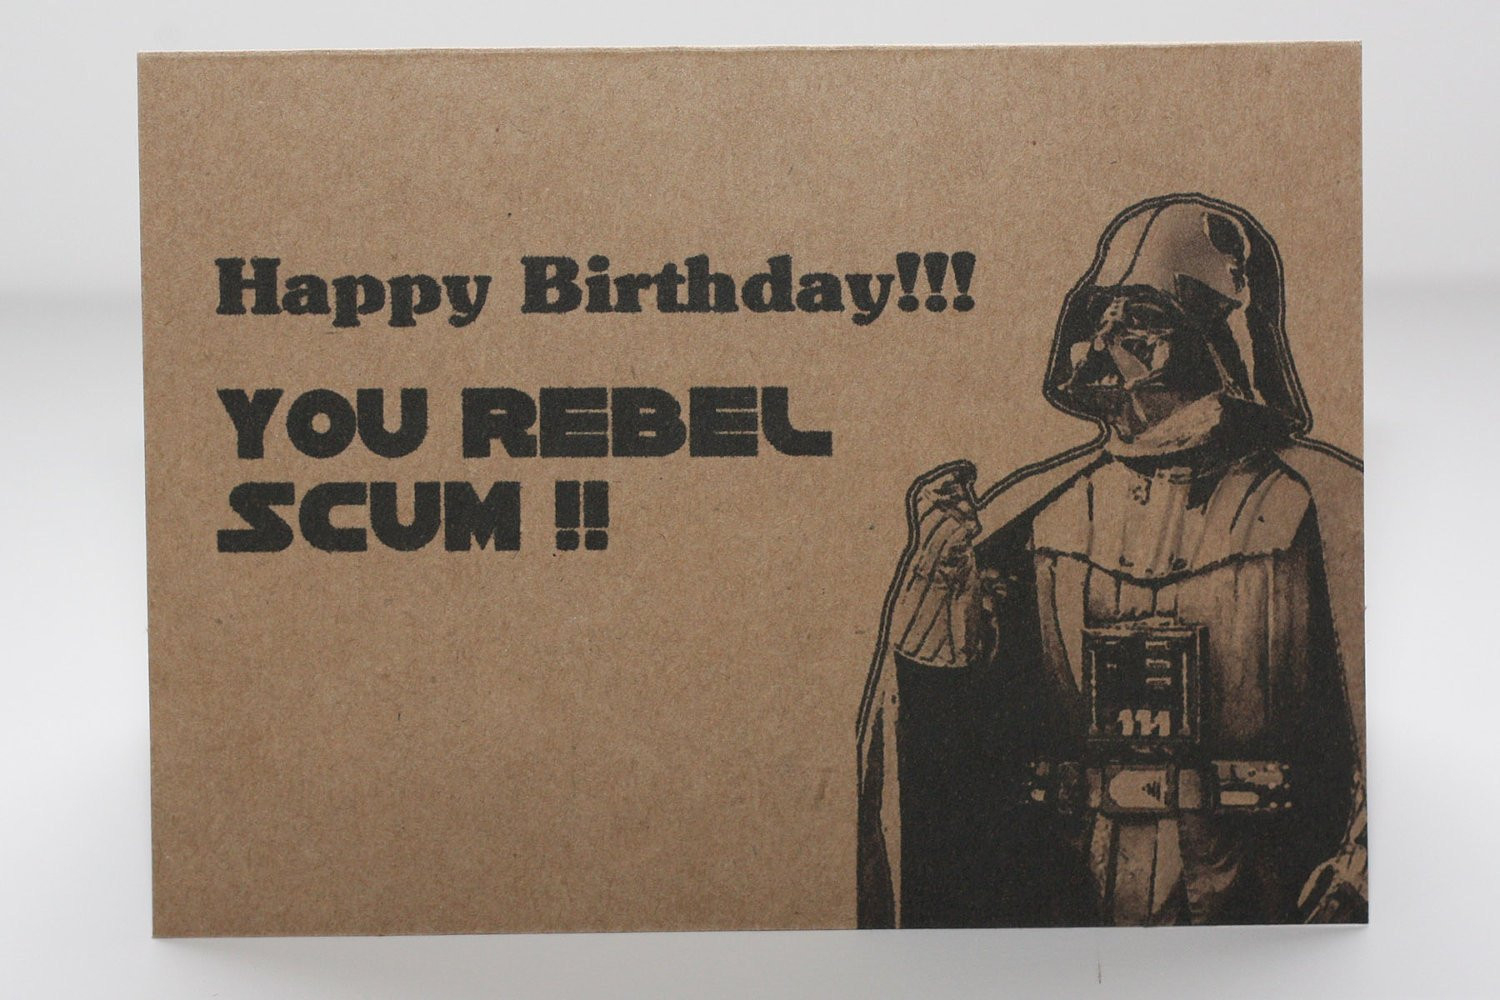 Star Wars Birthday Card Ideas Cool Star Wars Quotes For Birthday Cards